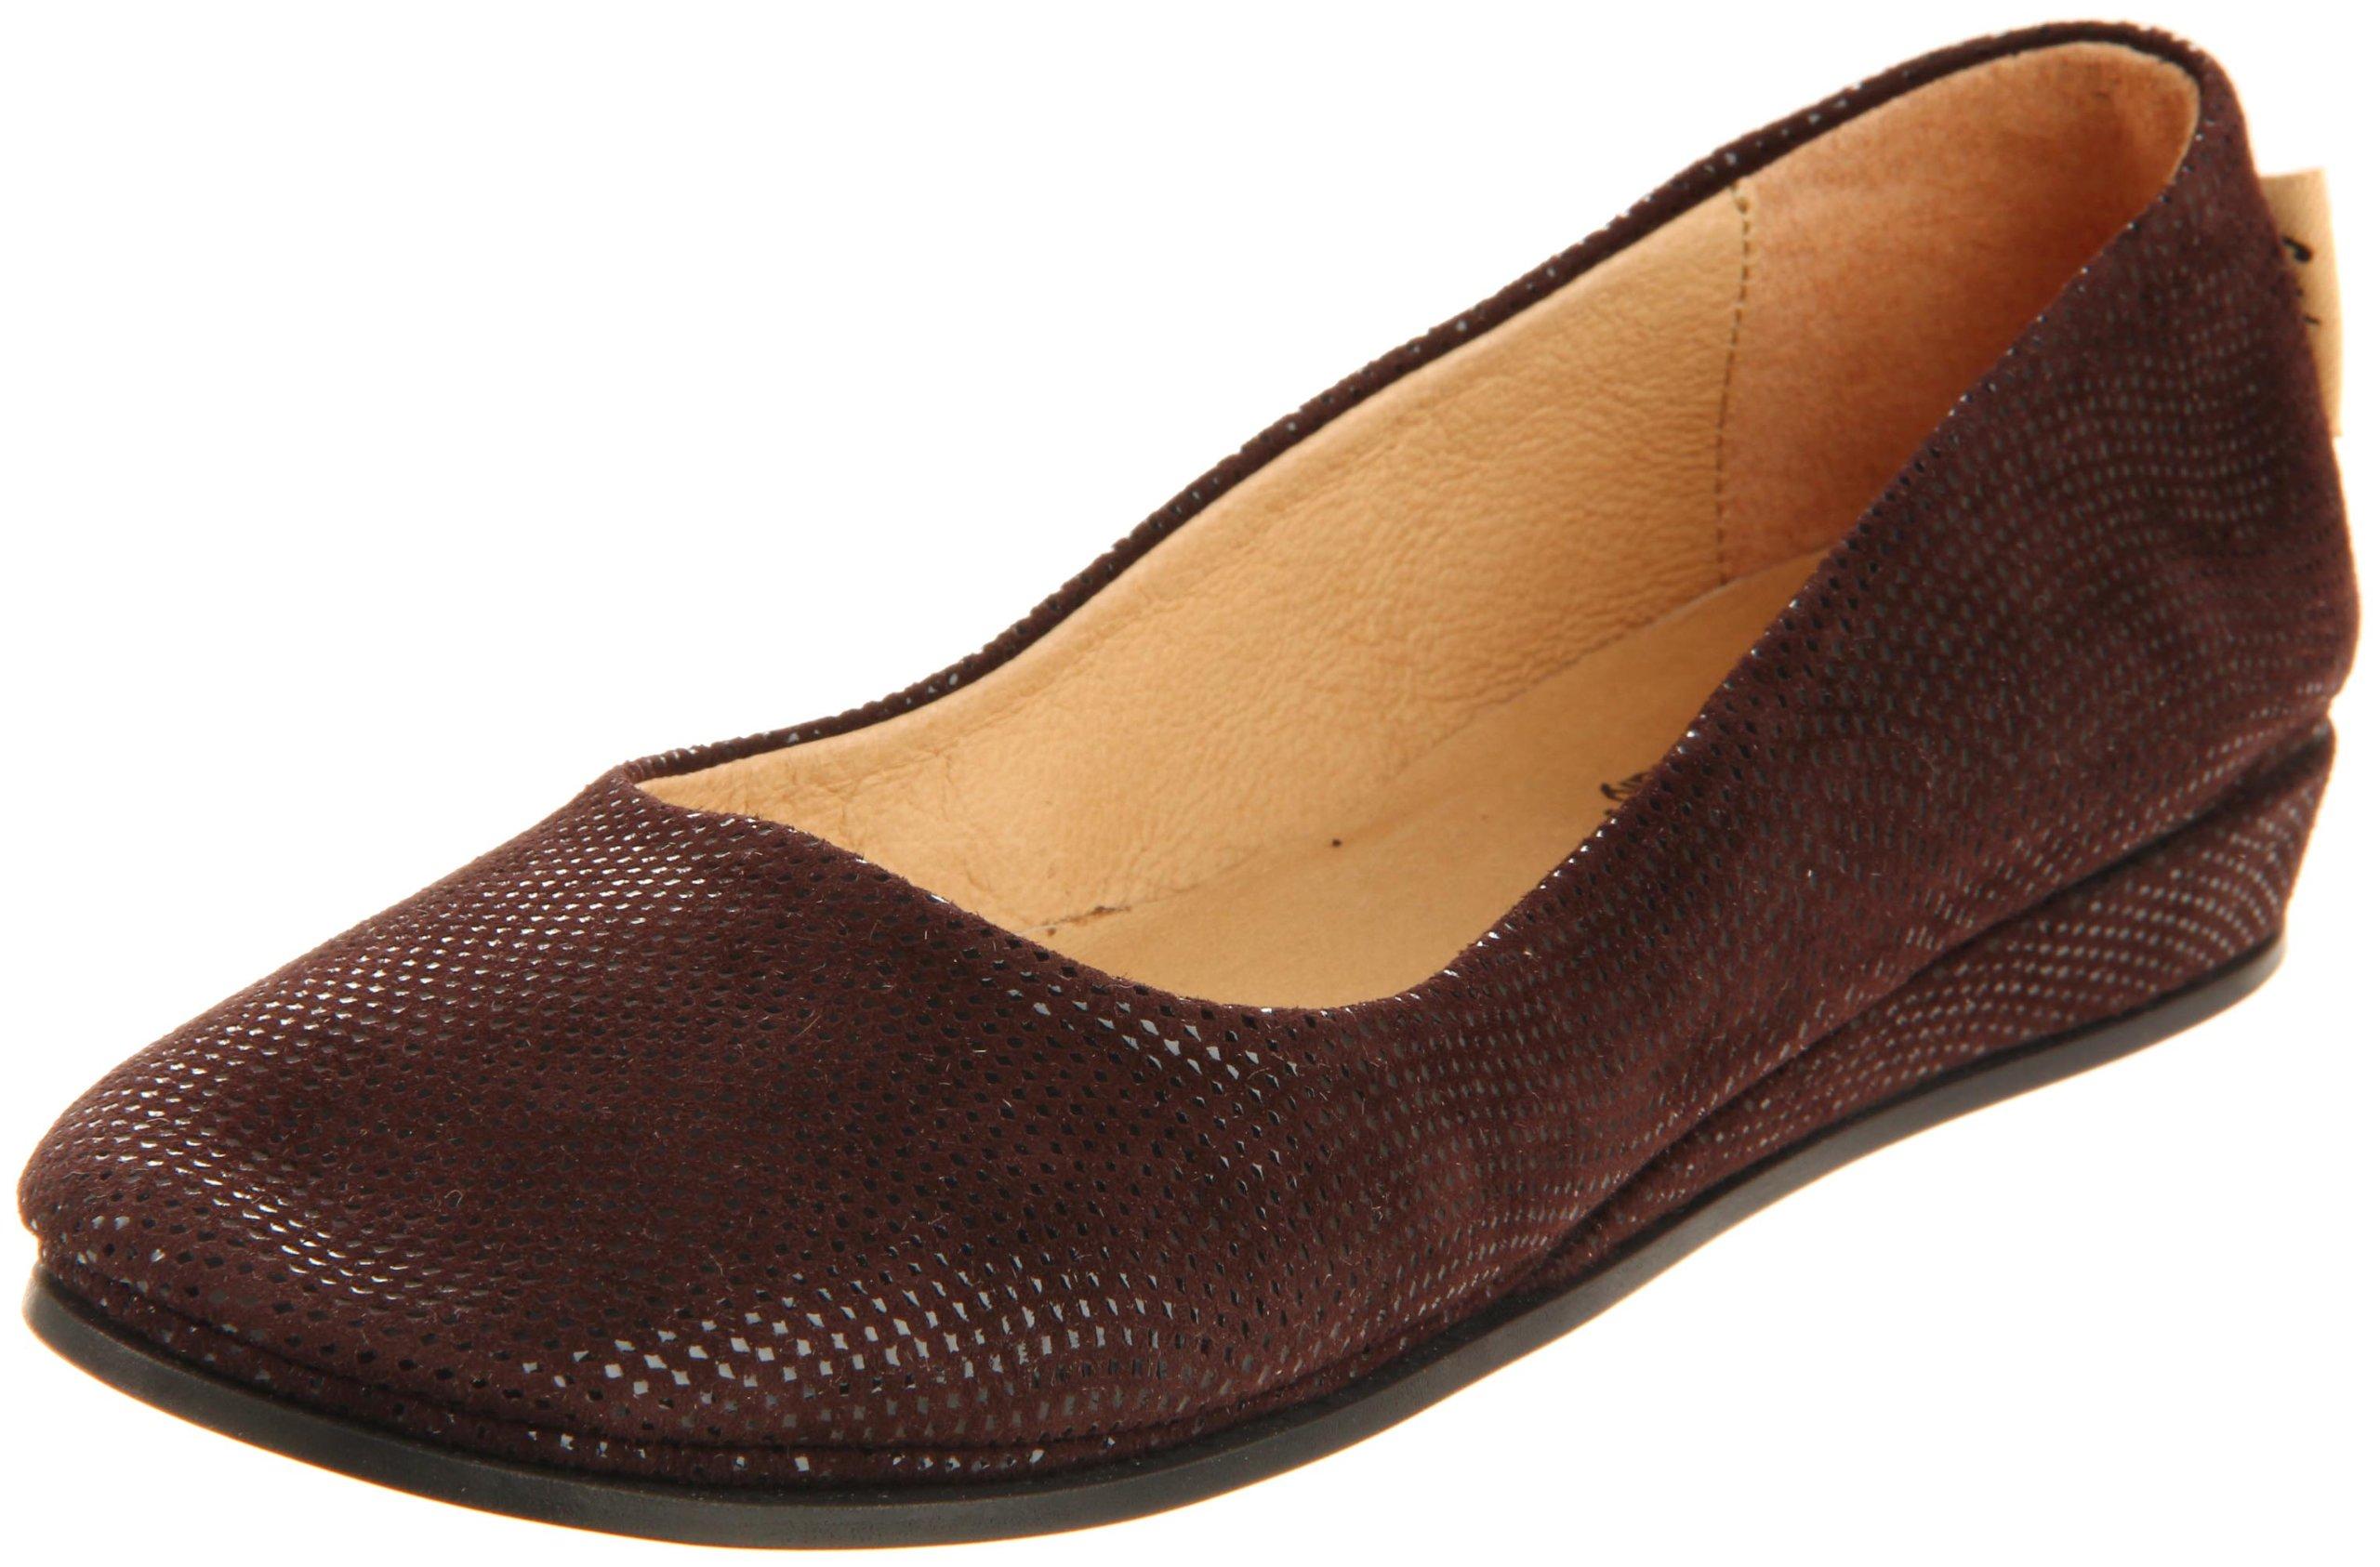 French Sole French Sole Zeppa Slip On Shoes,brown Wave,8 M Us - Lyst